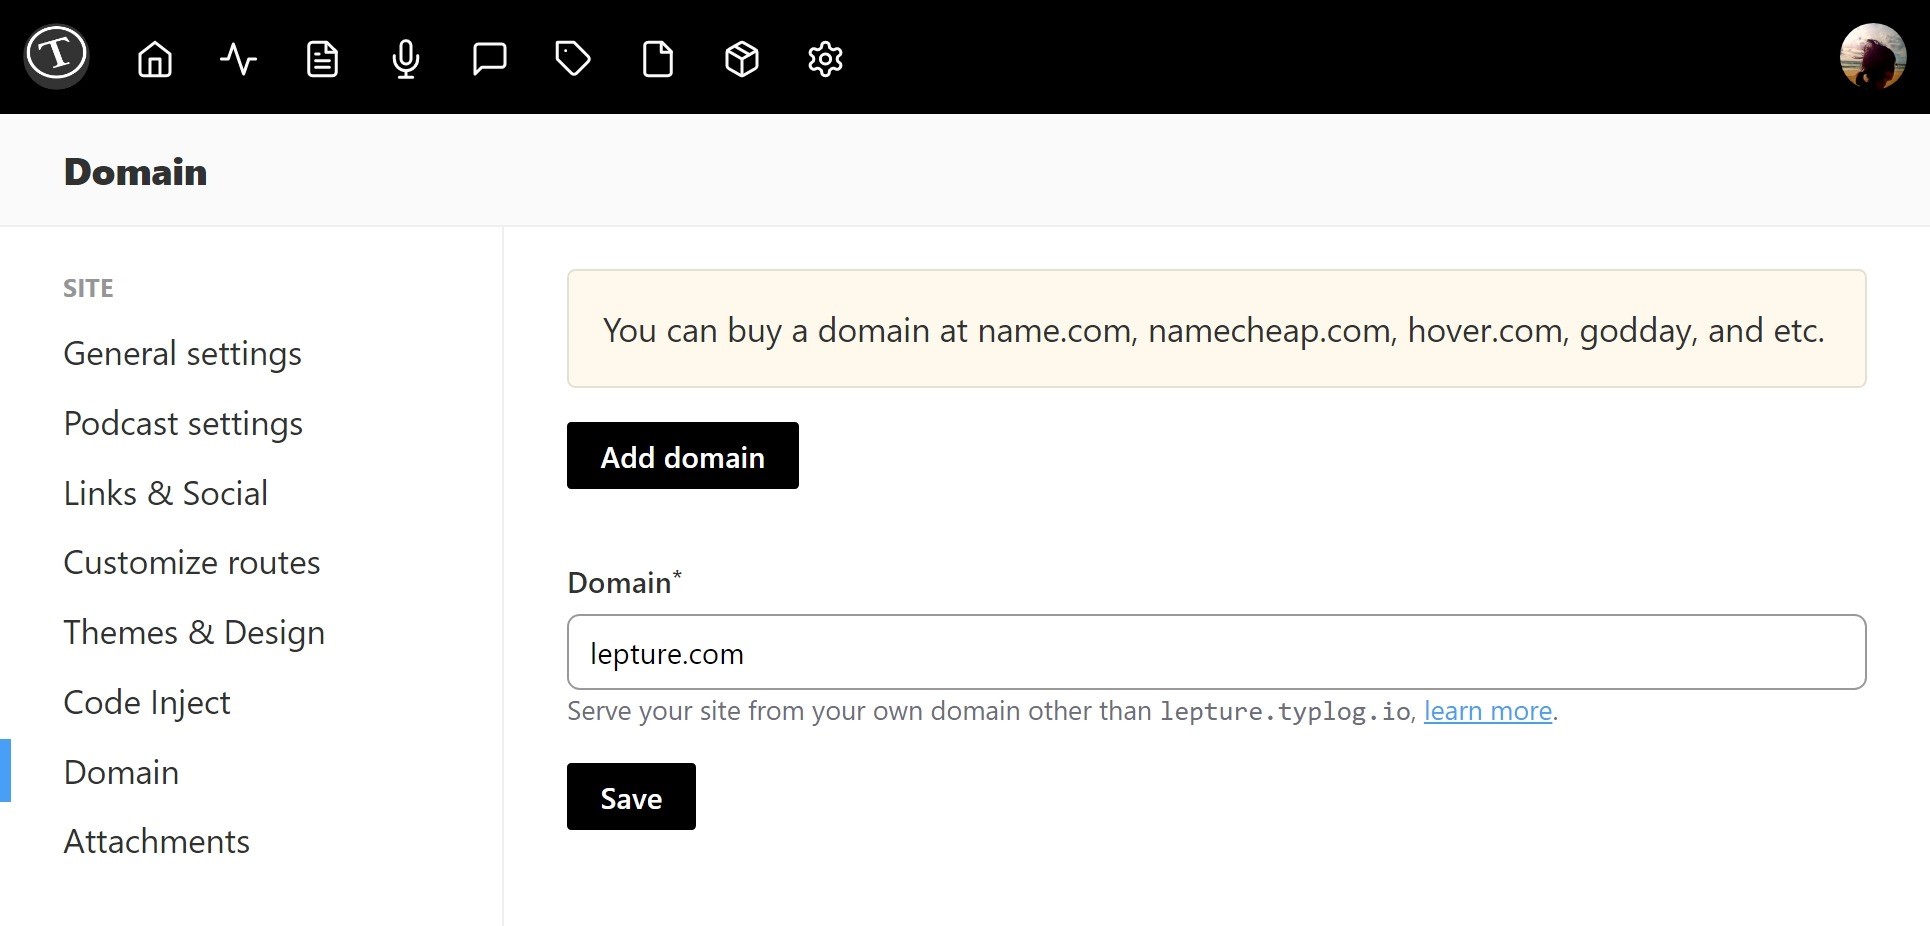 Add your own domain